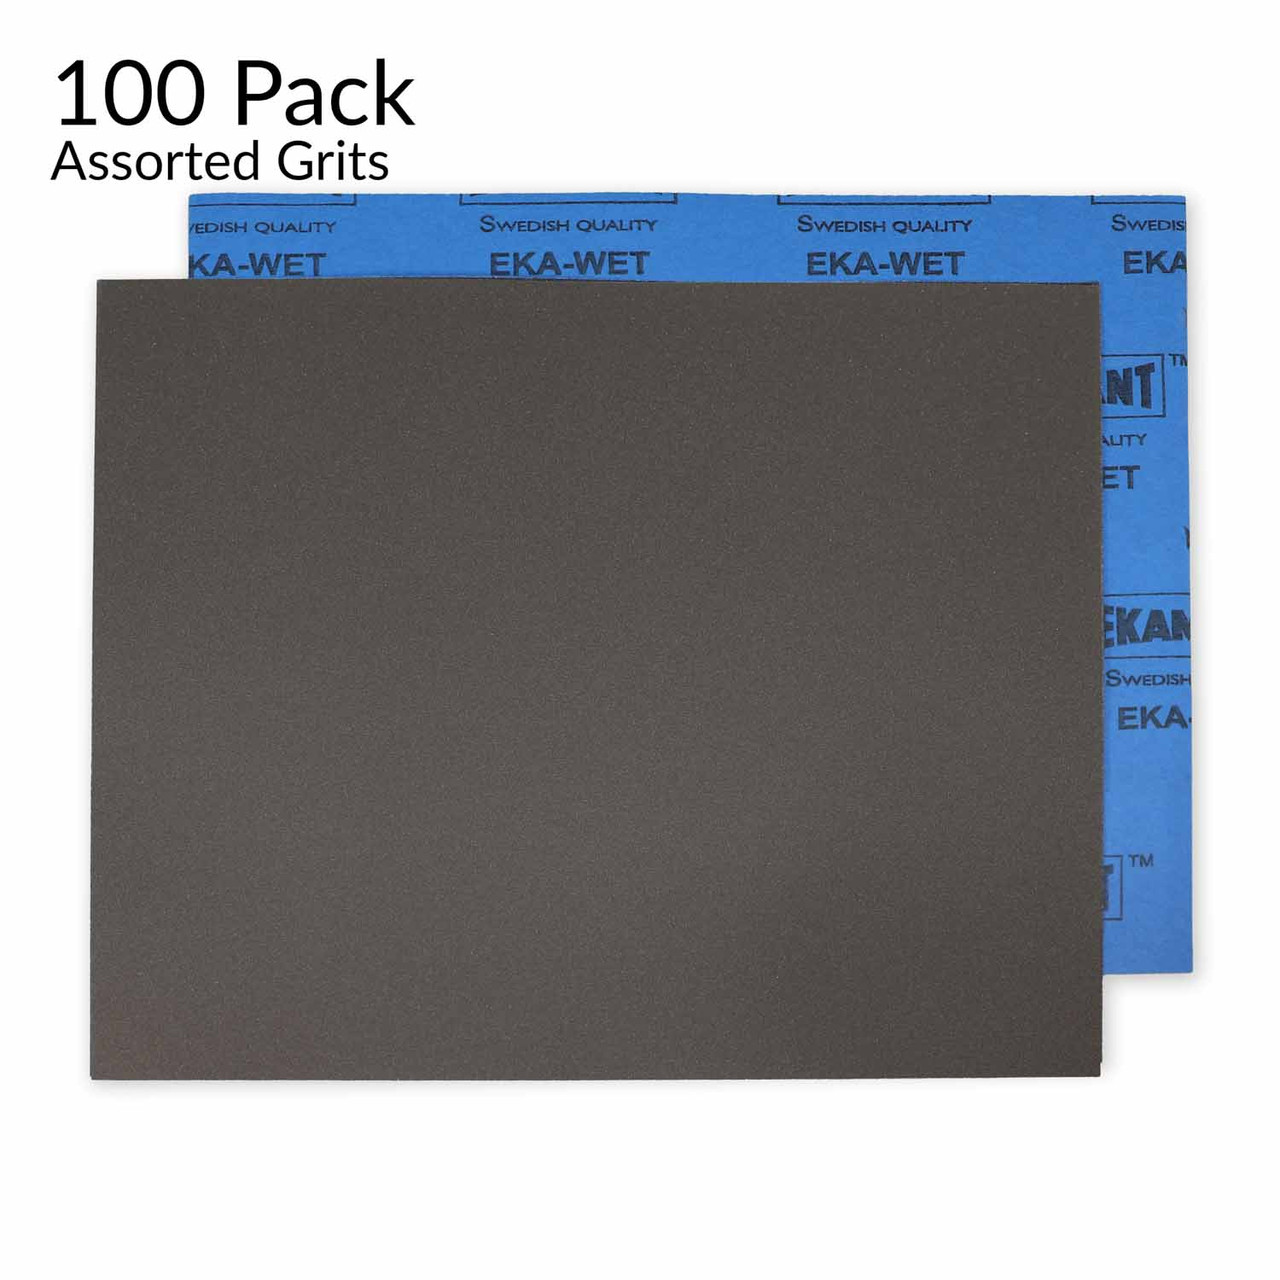 Hurricane SC Wet-Dry, 9" x 11" Silicon Carbide Sandpaper, Complete Variety Pack, 100 Sheets